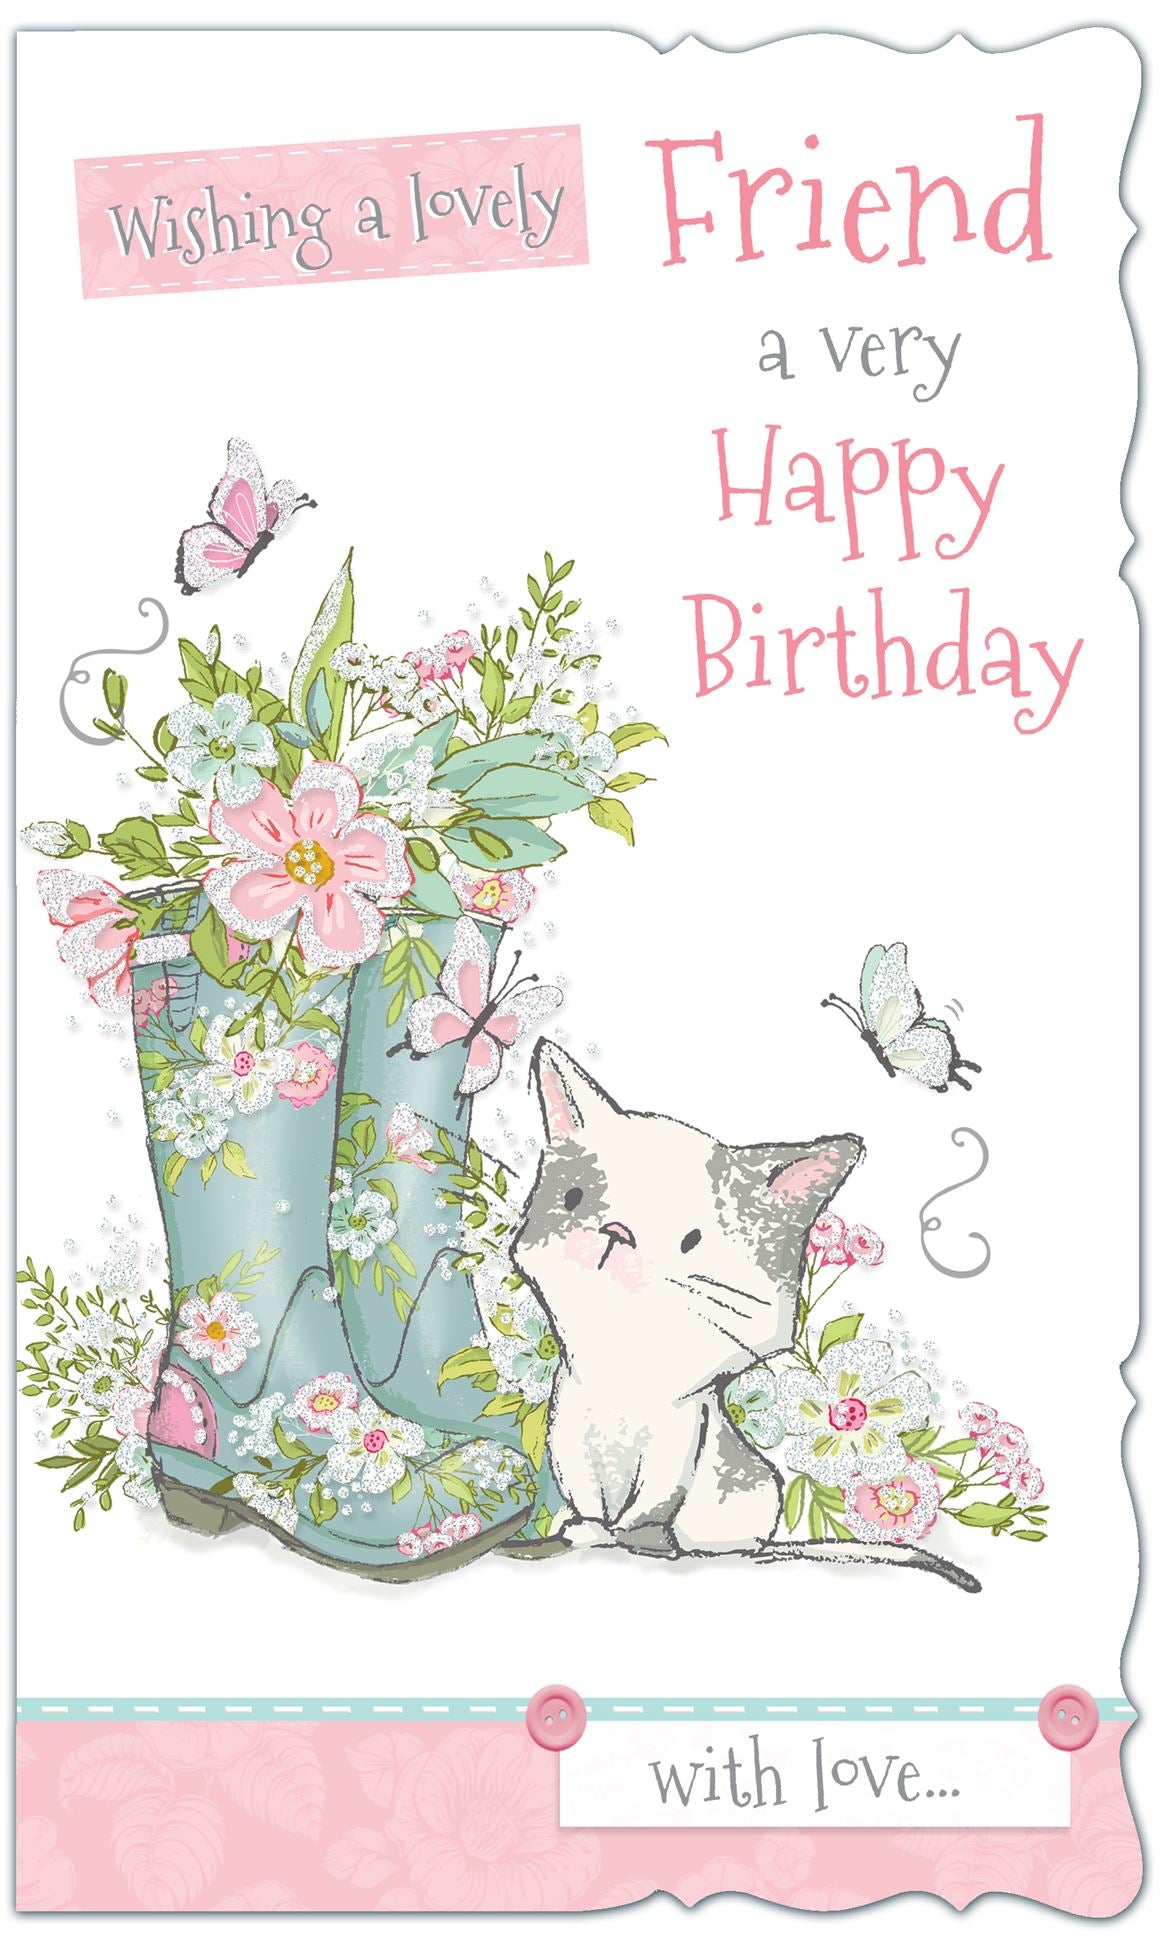 Friend birthday card cute cat and flowers